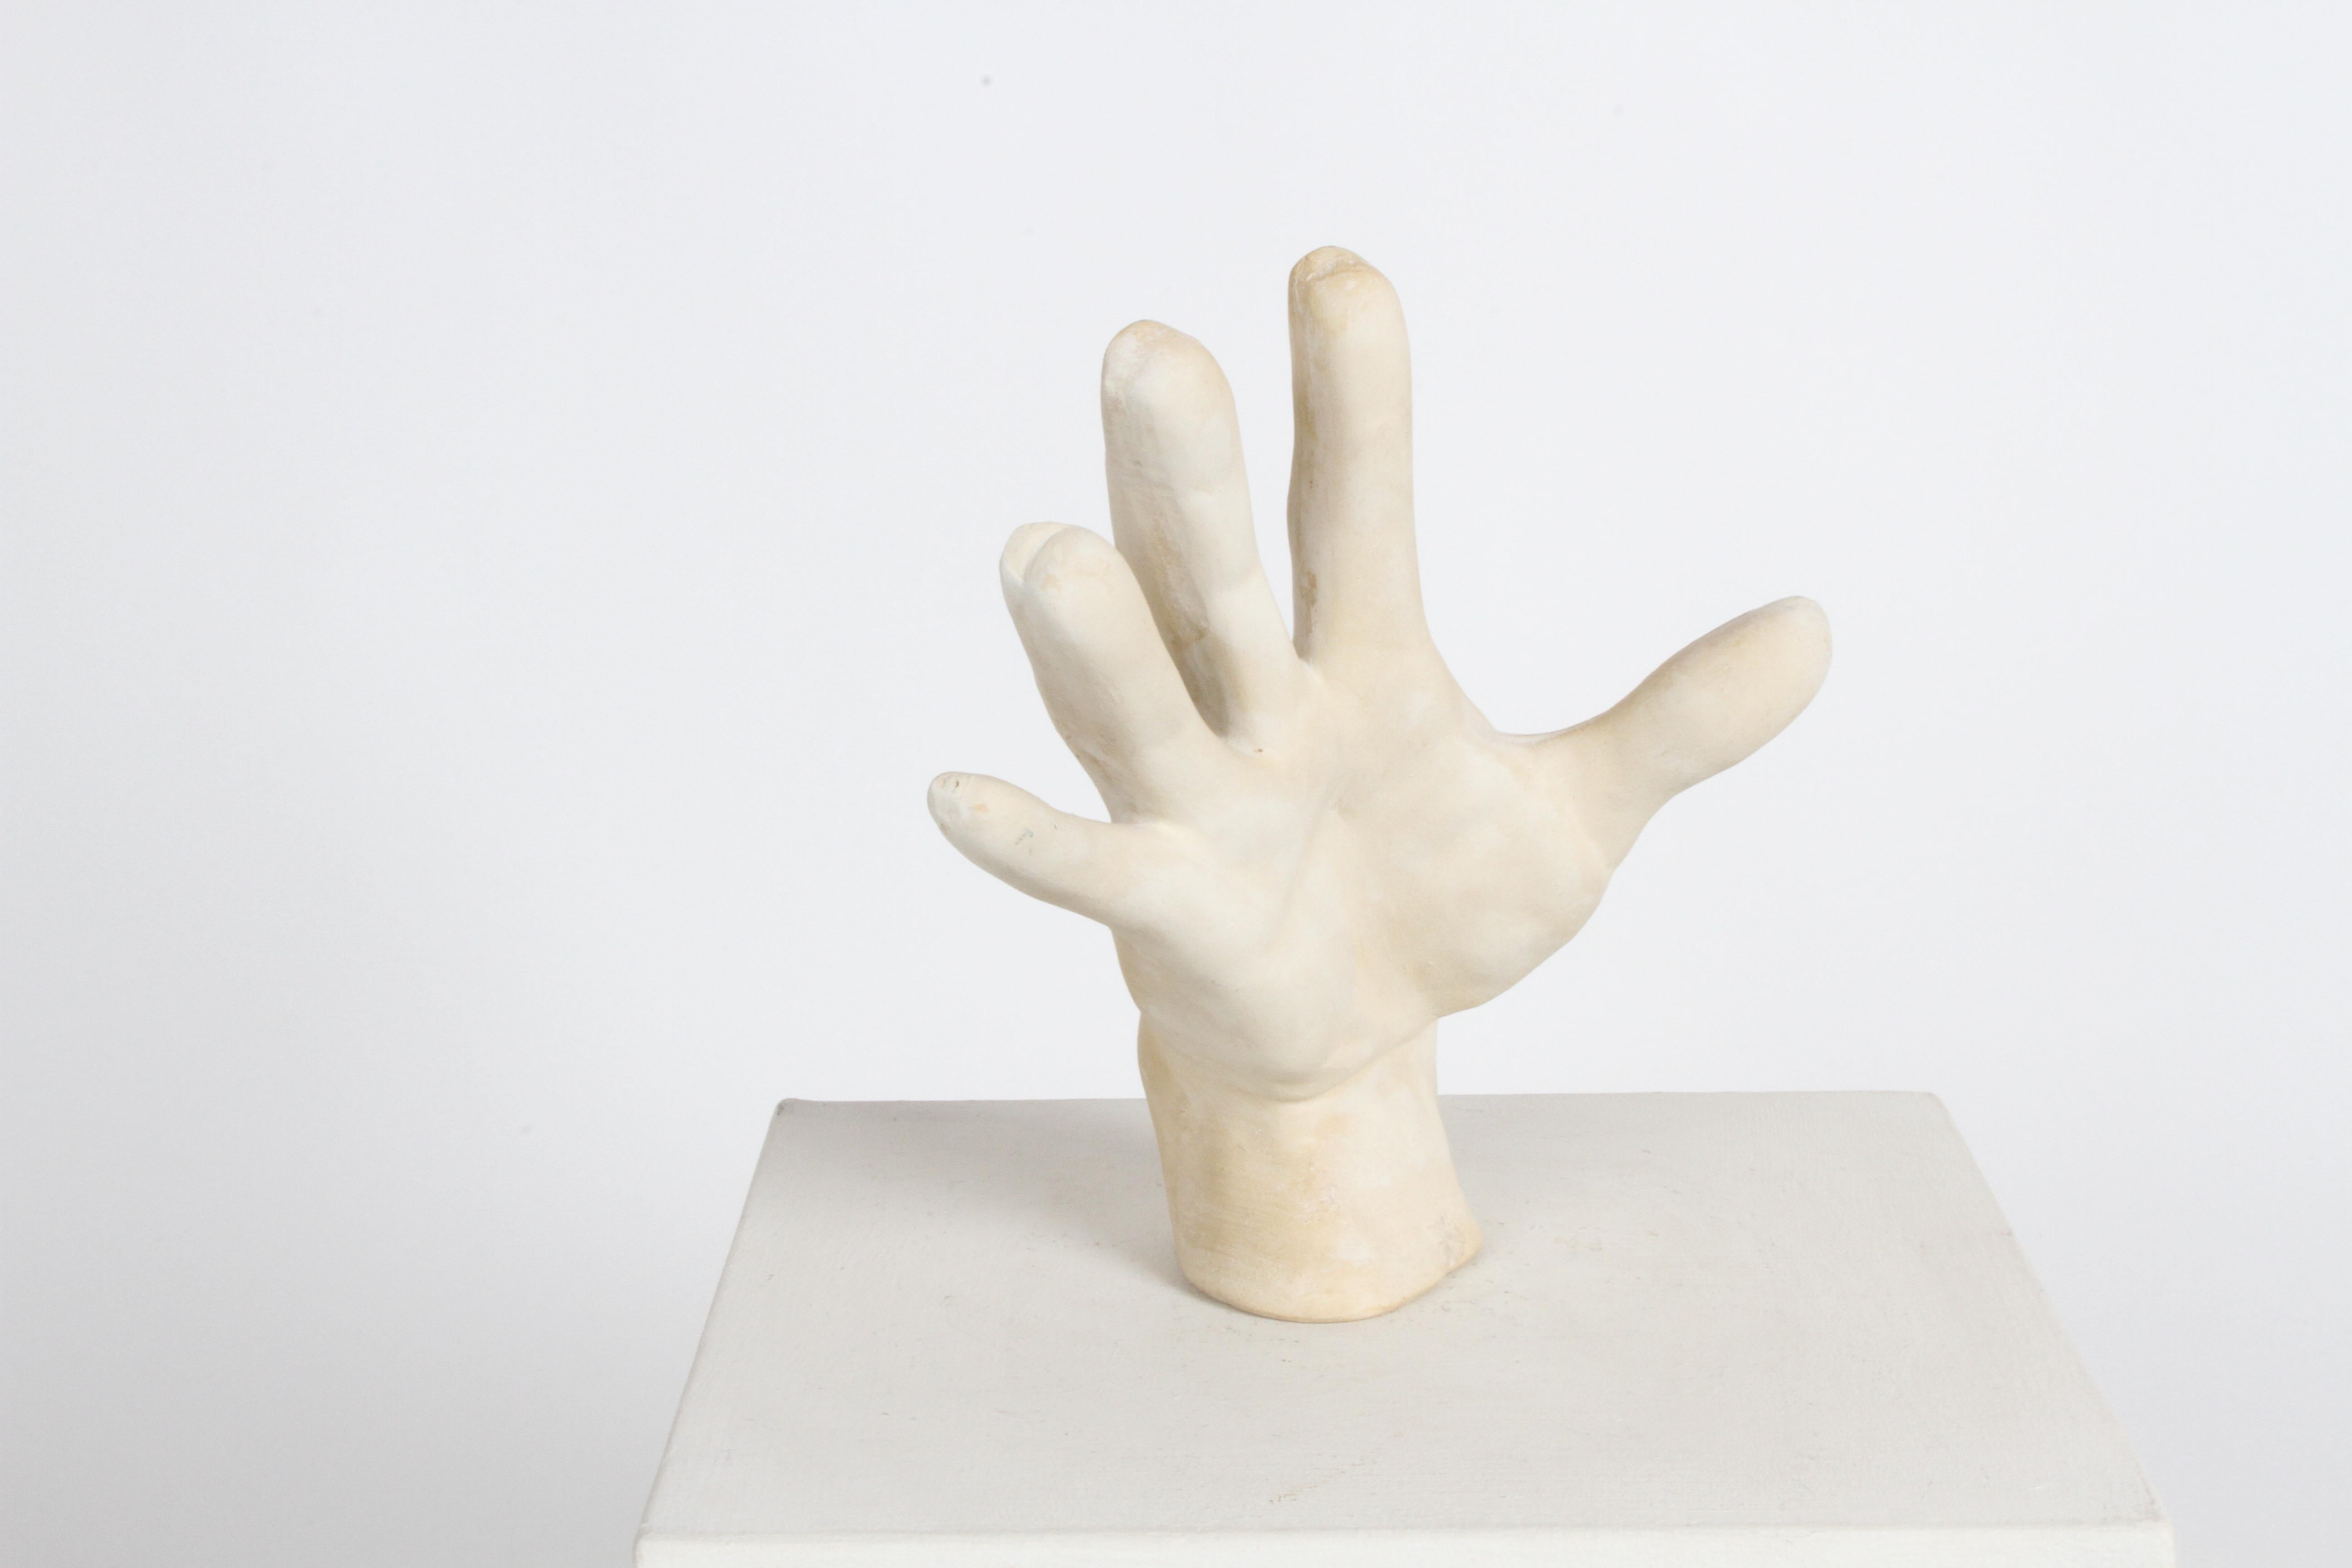 American Large 1970s Plaster Artist Hand Study Table Sculpture, Style of John Dickinson For Sale